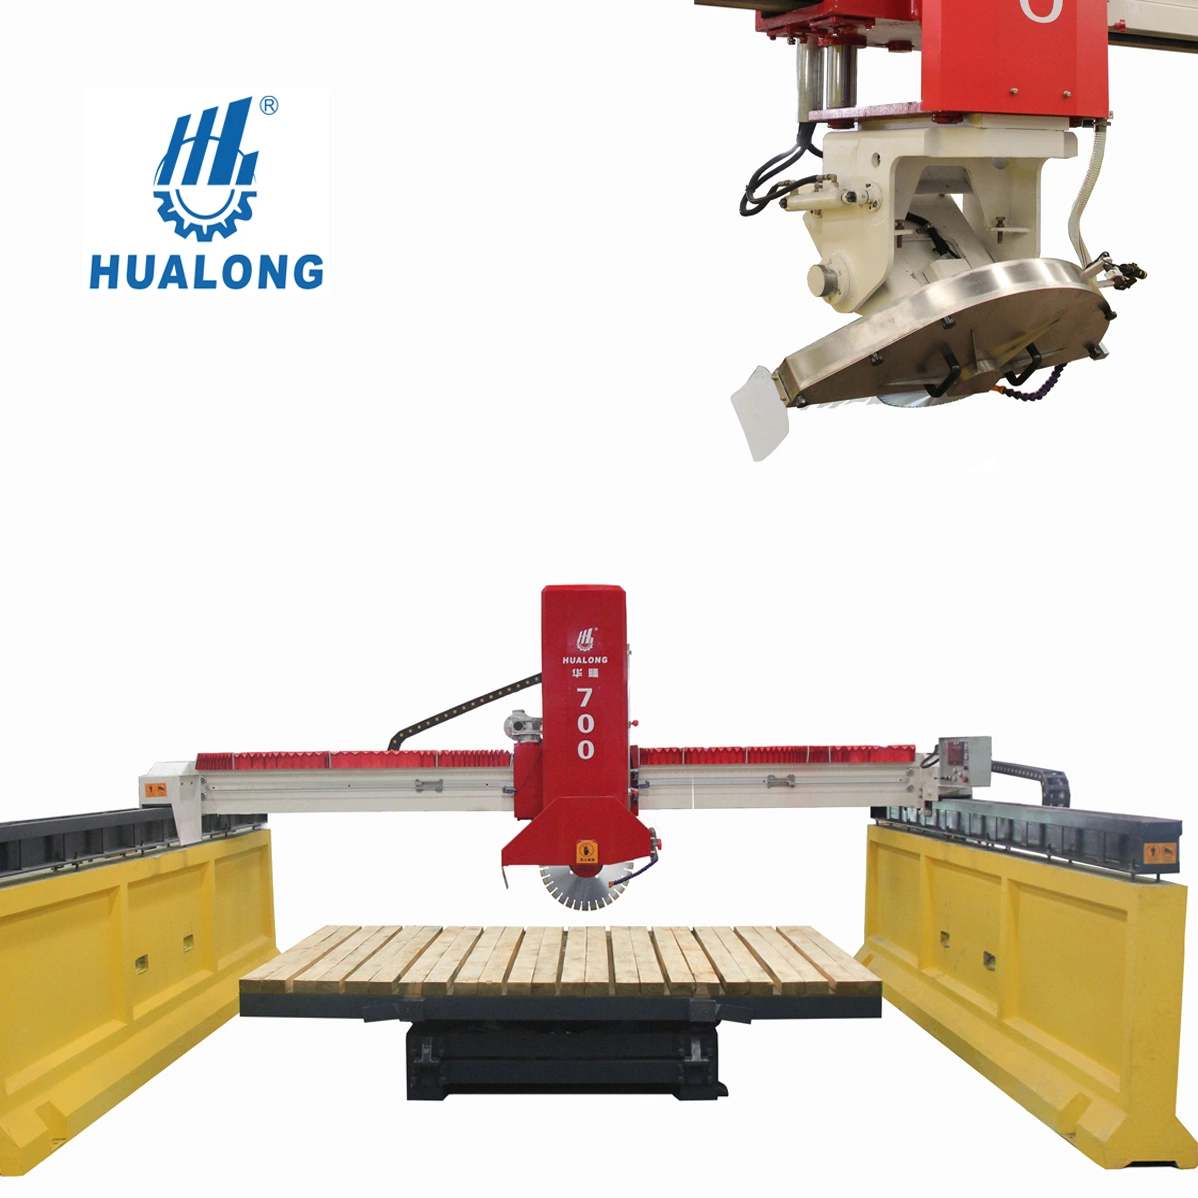 Hualong Stone Machinery Hlsq-700 Infrared Granite Marble Bridge Saw Cutter Slab Cutting Machine with Tilt Table for Sale